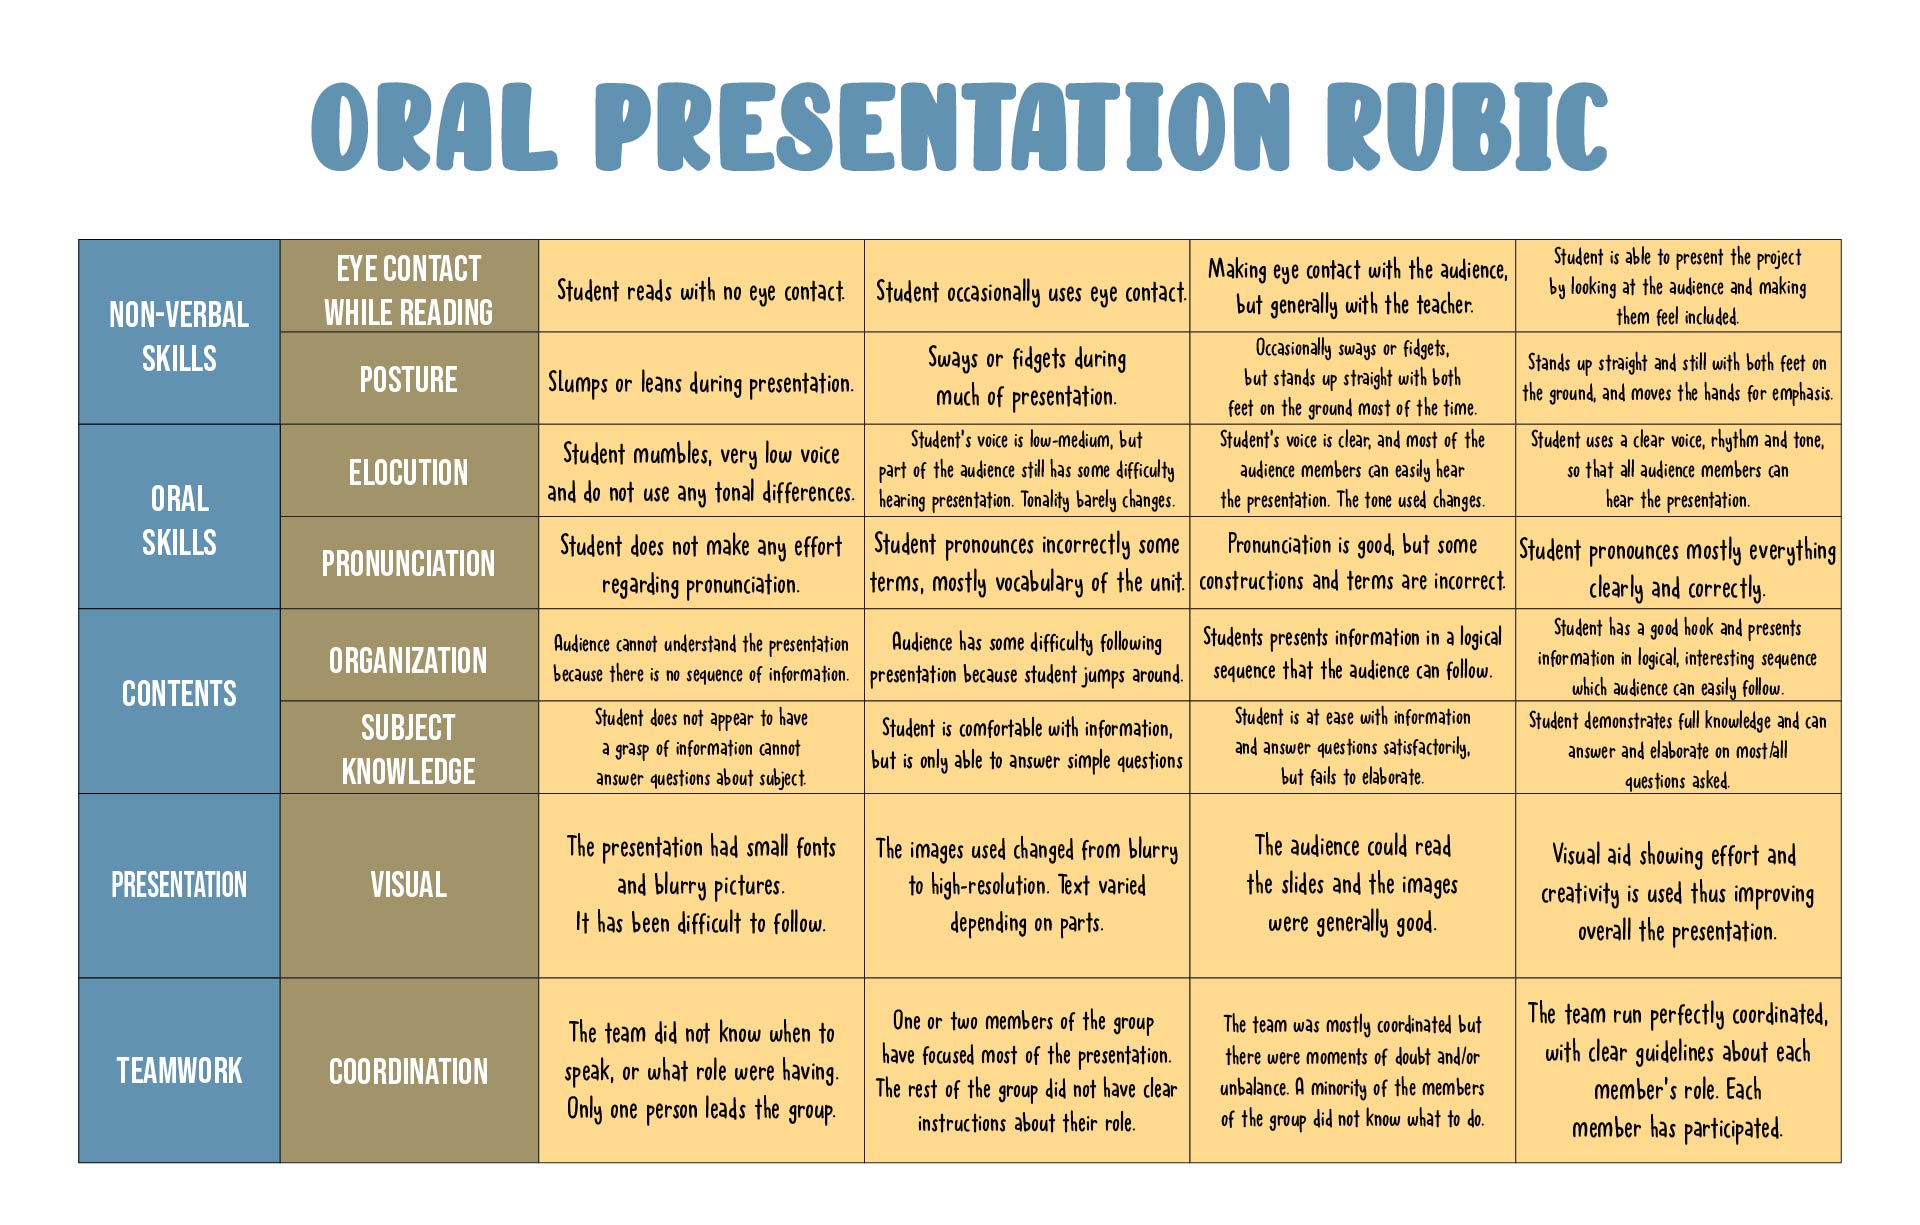 peer review rubric for presentations pdf